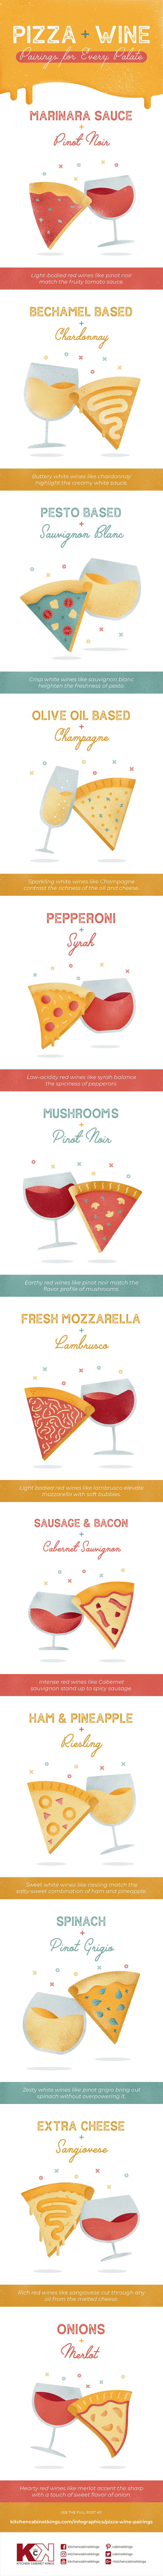 pizza and wine pairing guide